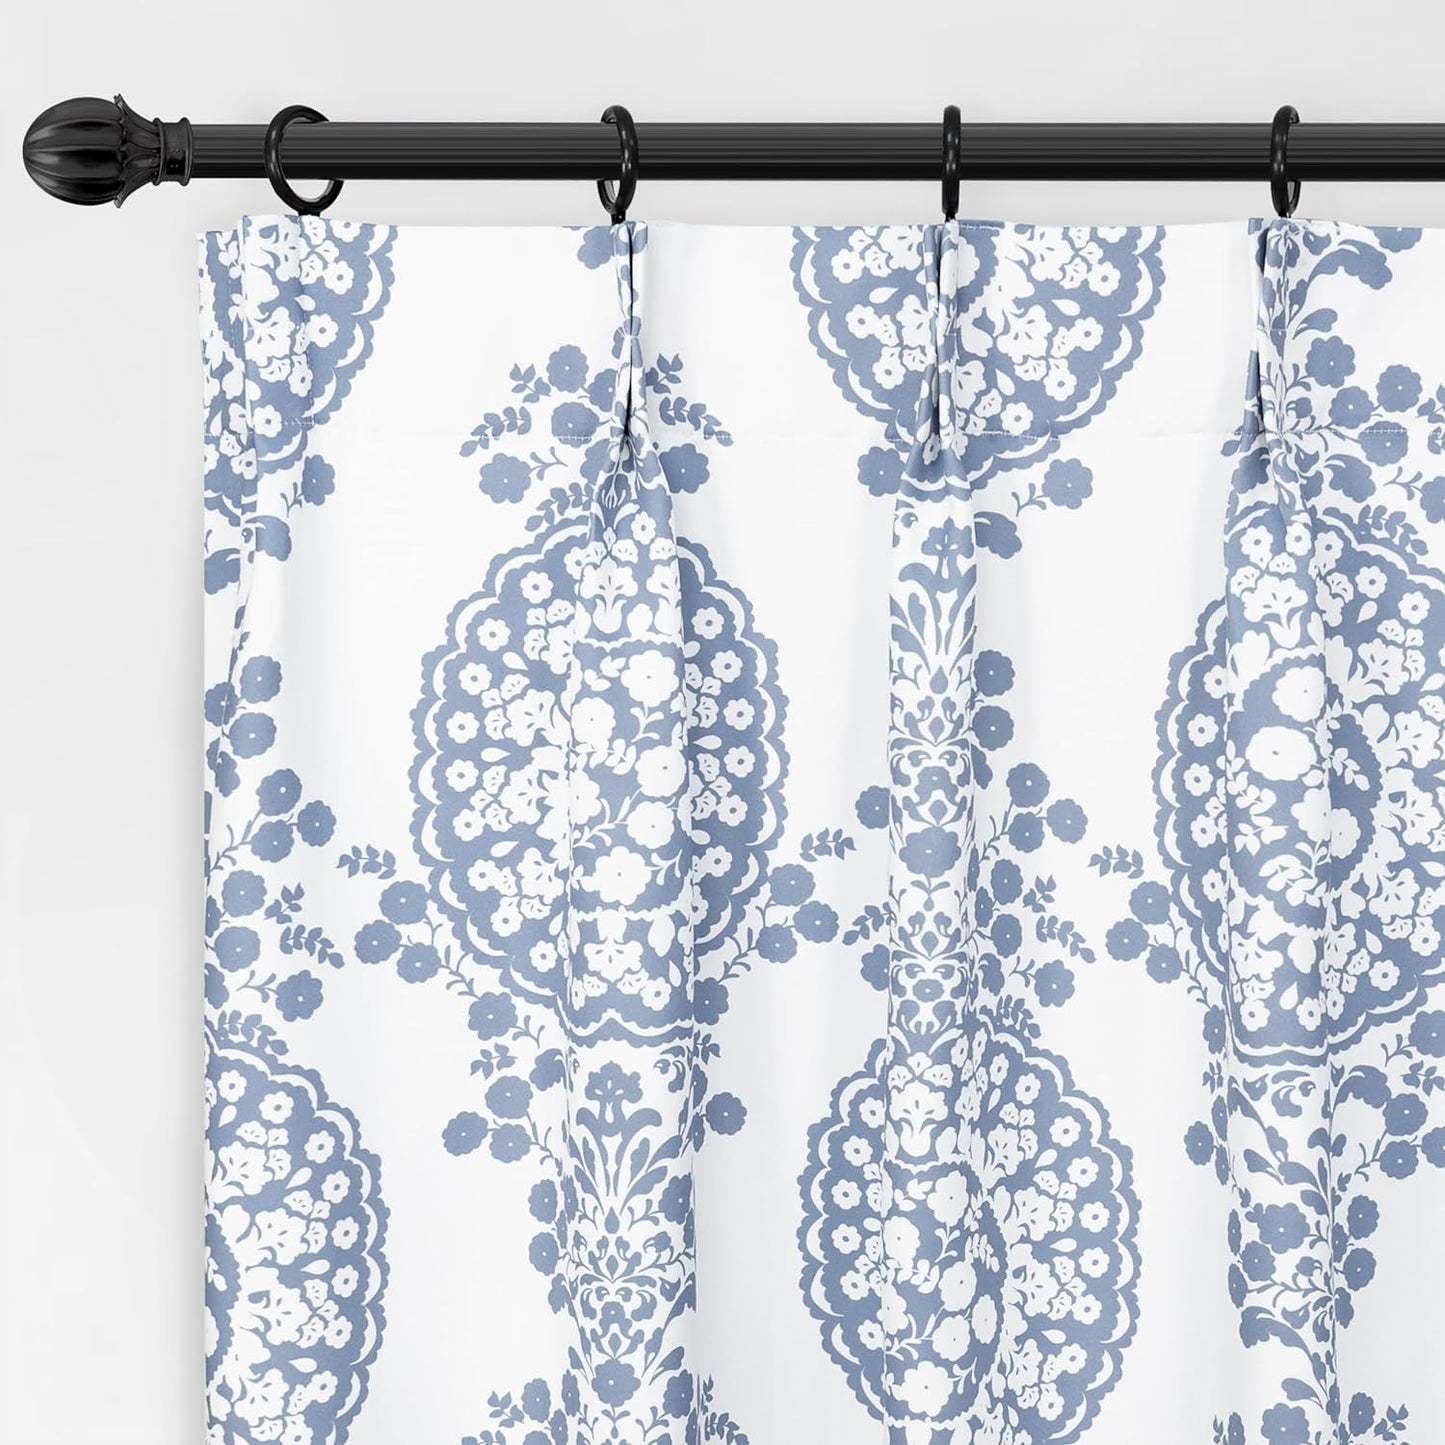 Driftaway Damask Curtains for Kitchen Bathroom Laundry Room Small Windows Floral Damask Medallion Patterned Adjustable Tie up Curtain Single 45 Inch by 63 Inch Dusty Blue  DriftAway Blue (10)30"X36"(Curtains) 